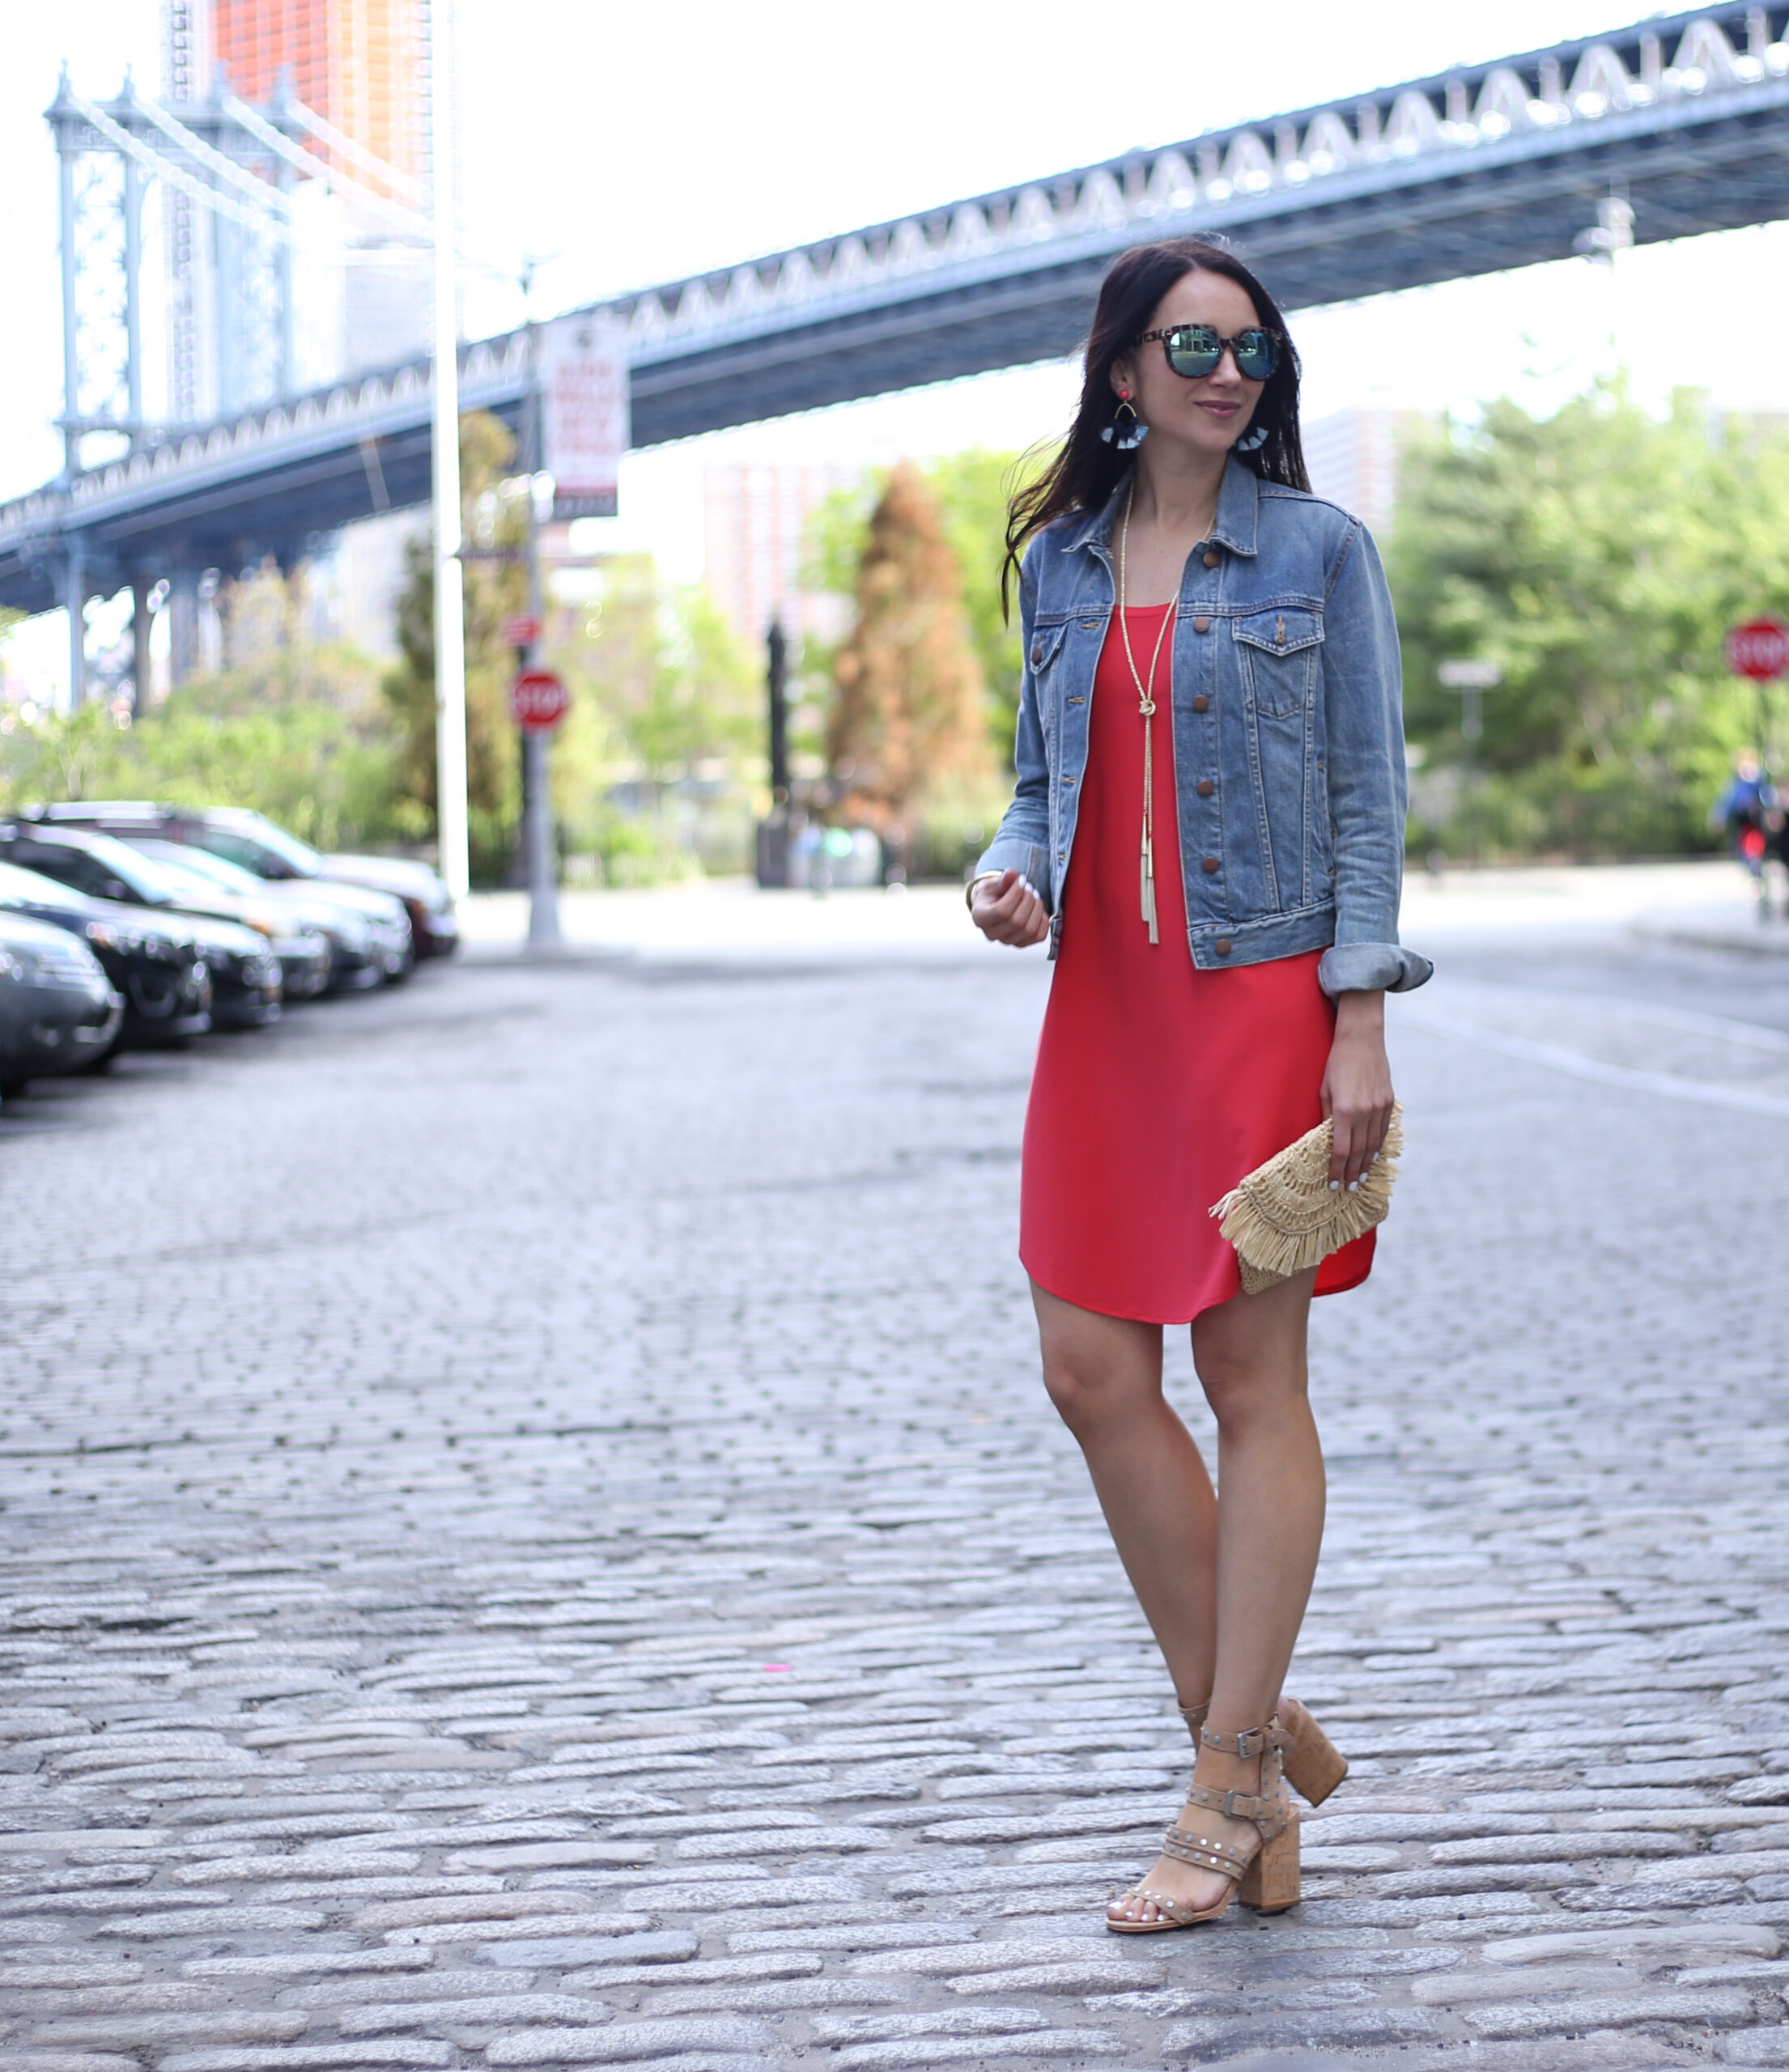 Anna Monteiro of Blushing Rose Style wearing Madewell denim jacket and red Leith tank dress